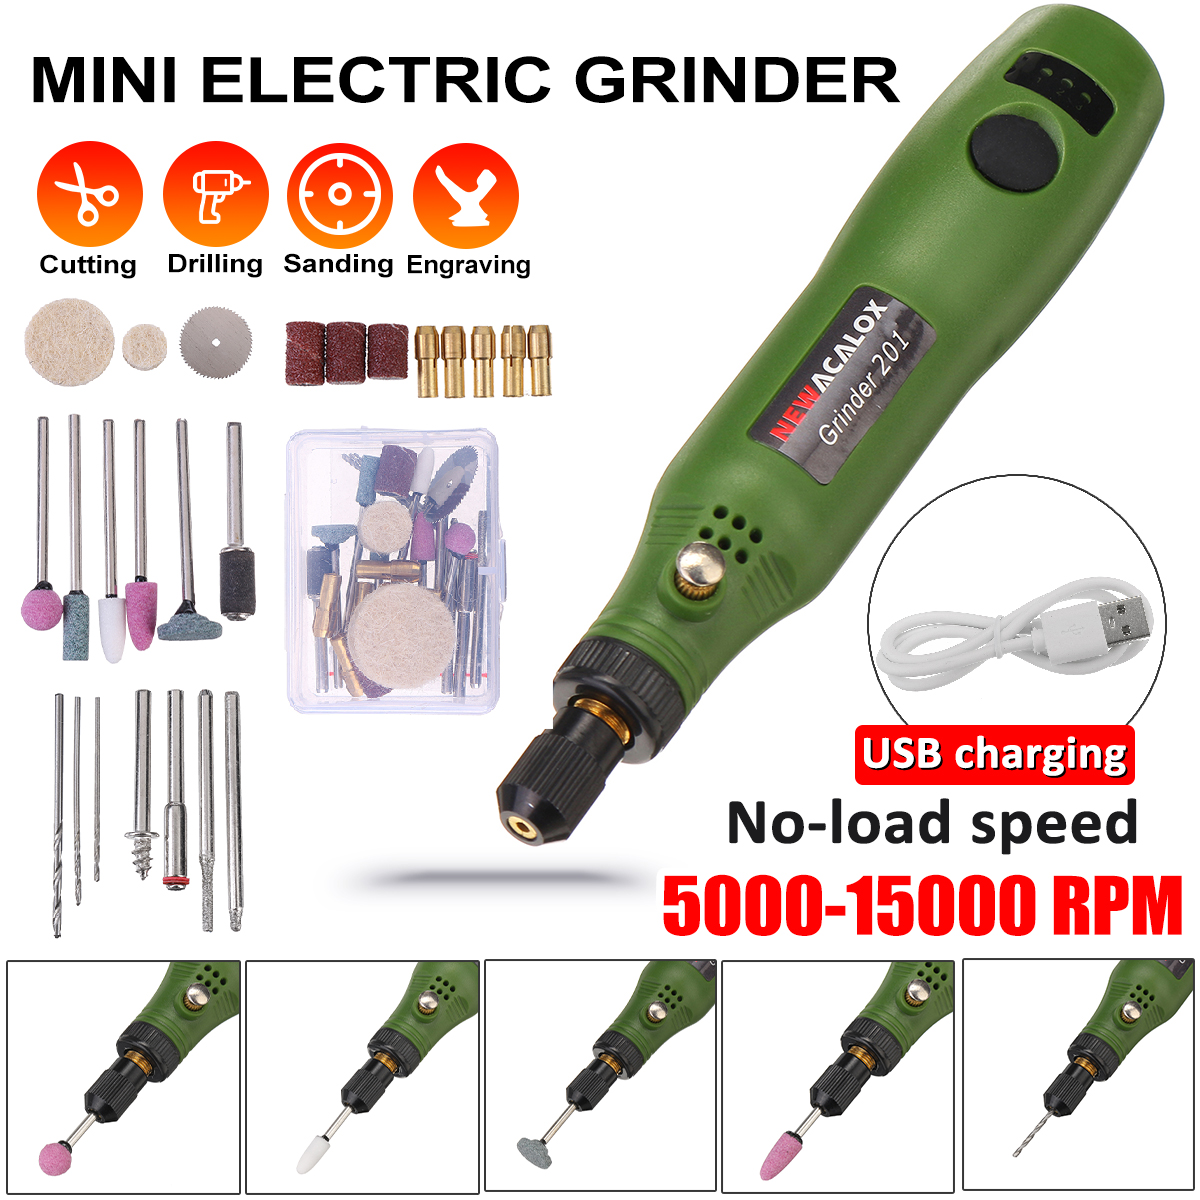 10W-Cordless-Electric-Grinder-Drill-5000-15000rpm-USB-Rotary-Tool-Drill-3-Gears-Grinder-Pen-Engravin-1621850-3